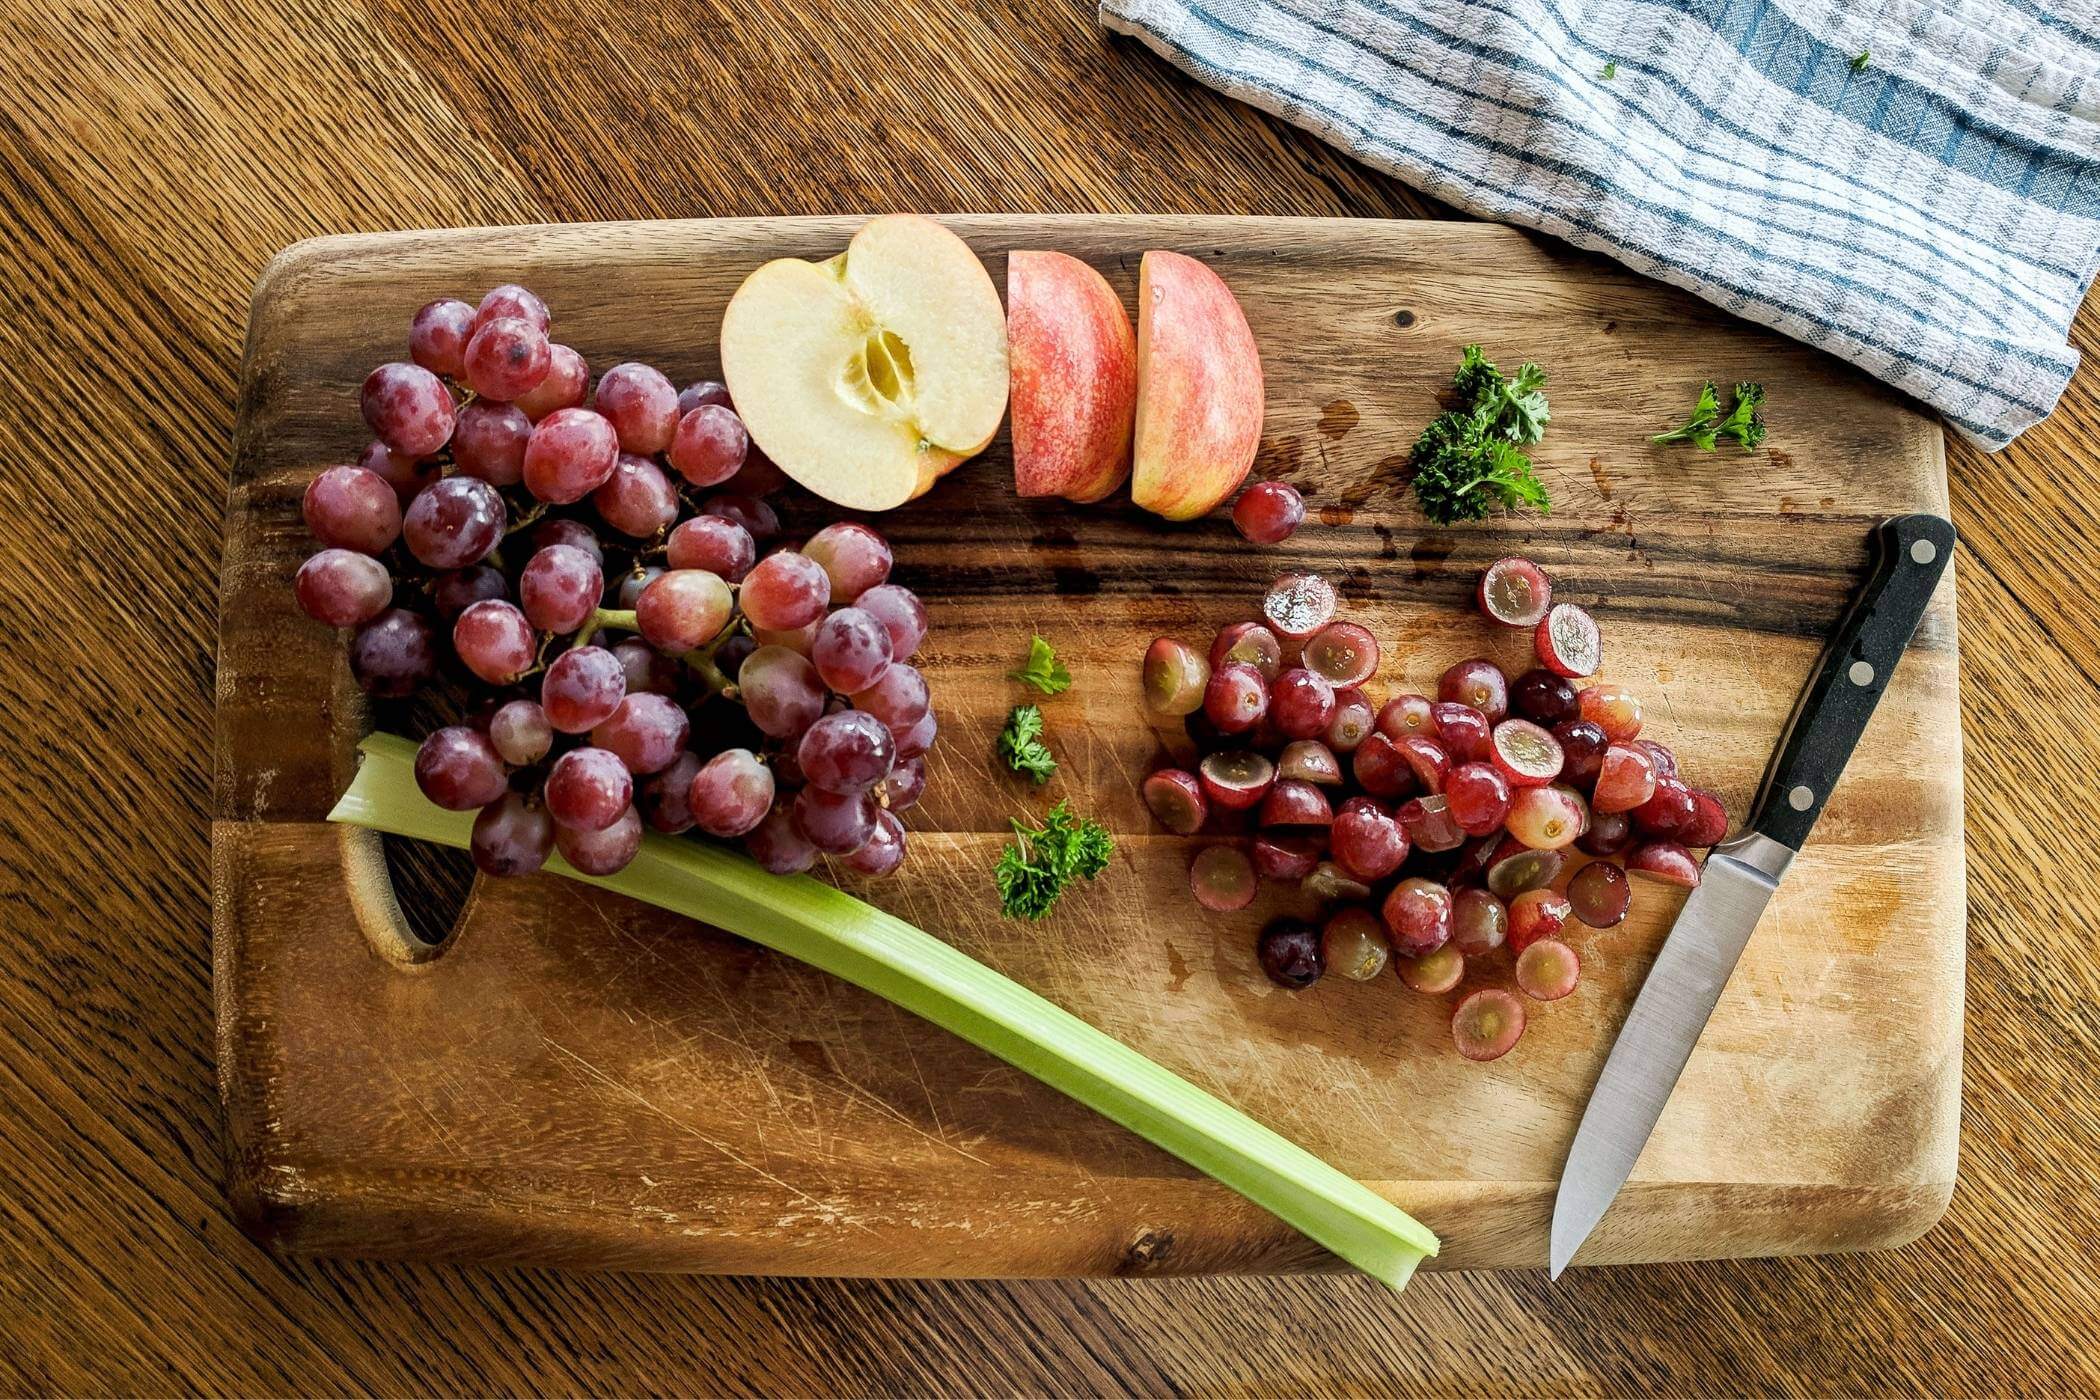 grapes and apples on cutting board.